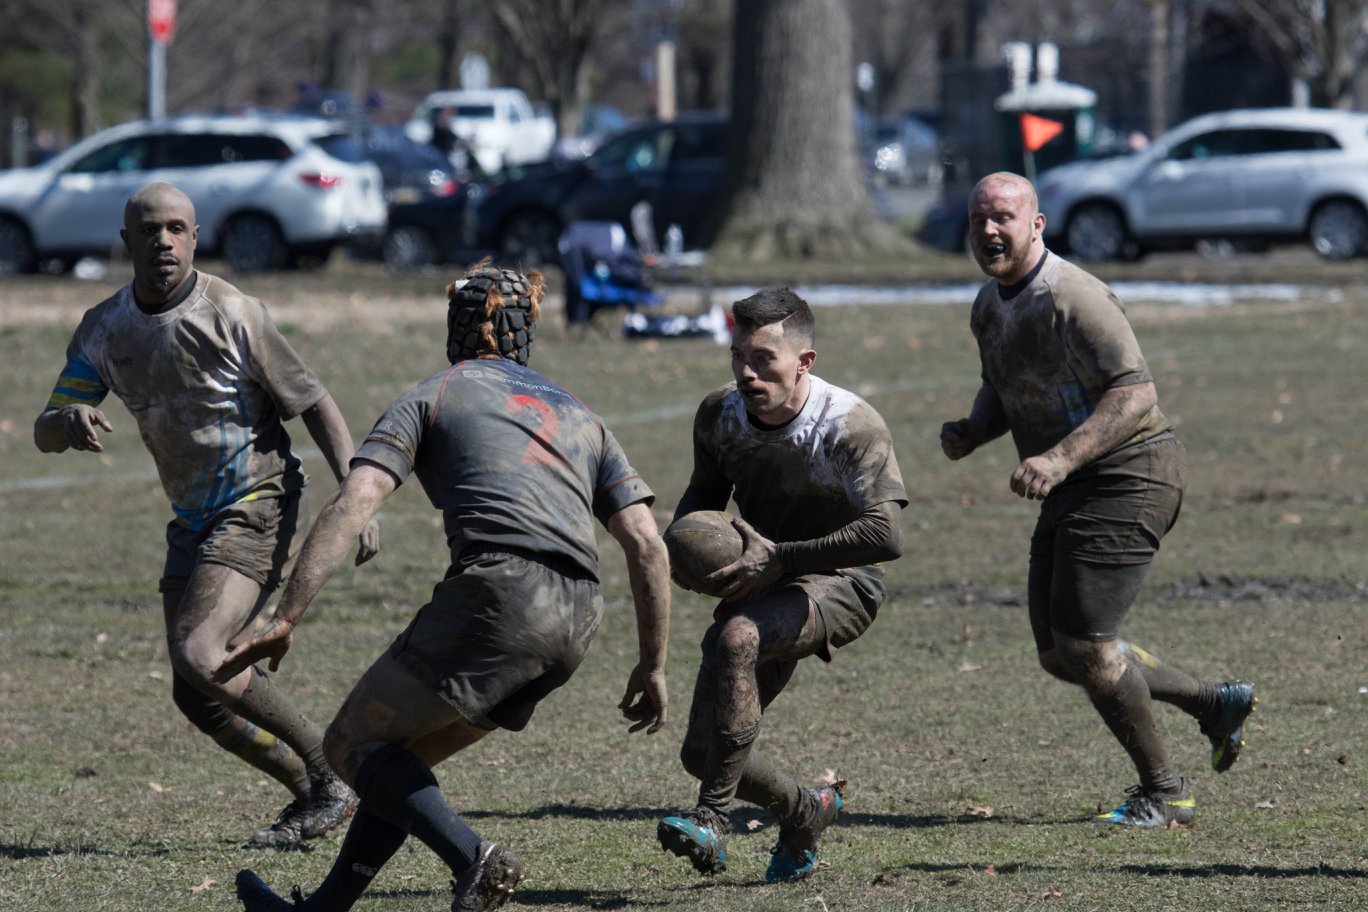 Action shot of Philly Gryphons in the Mud.